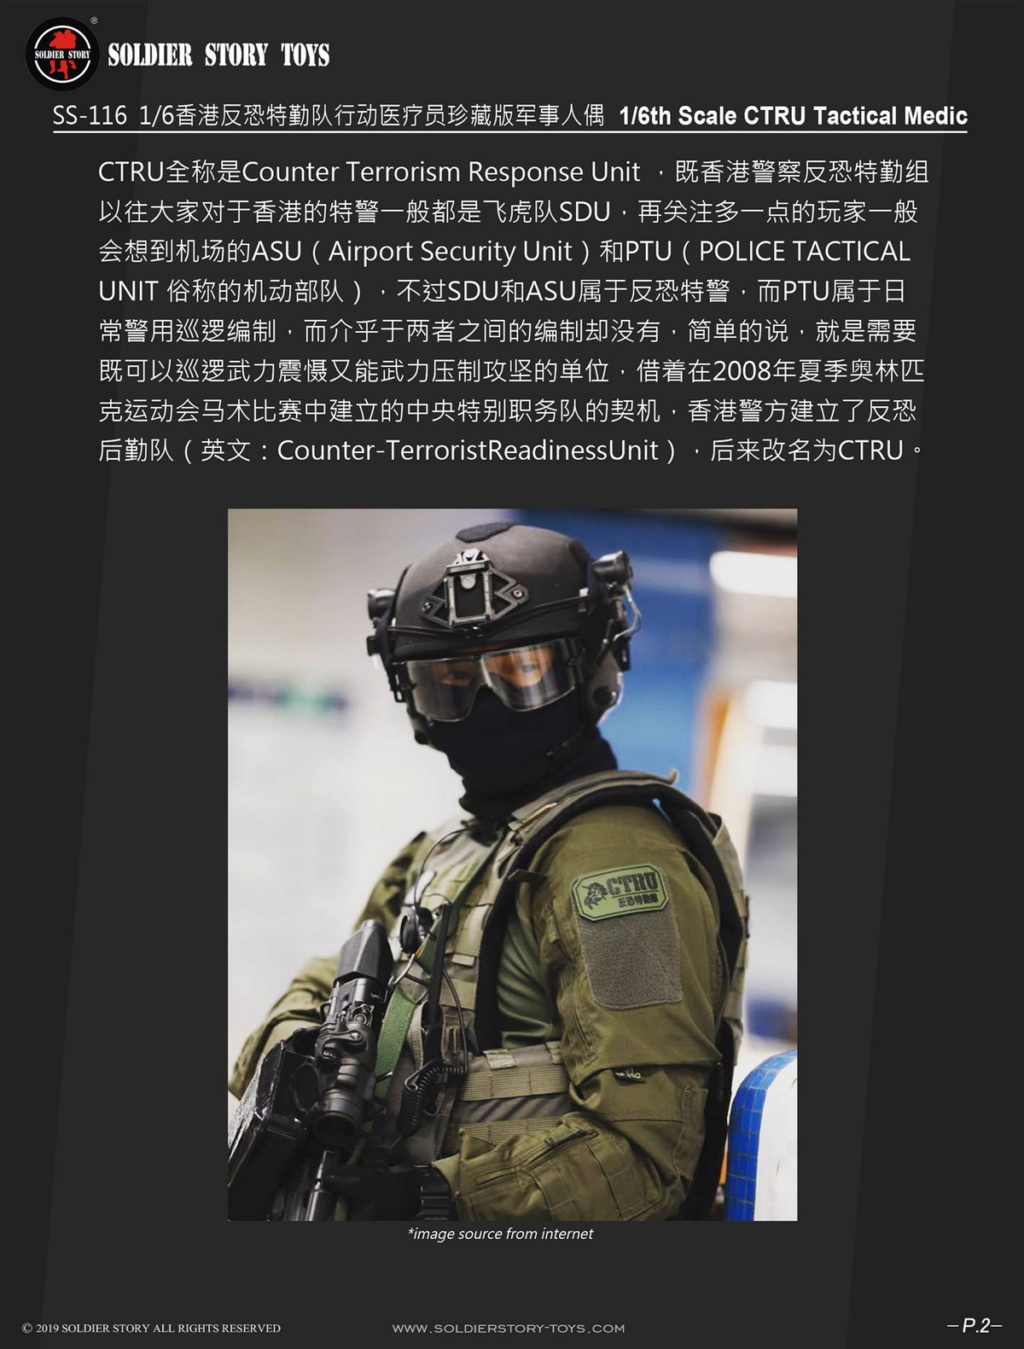 ModernMilitary - NEW PRODUCT: SoldierStory: 1/6 Hong Kong anti-terrorism secret service team CTRU - Mobile medical staff "Xiao Zhang" (SS116) updated full map 23394810